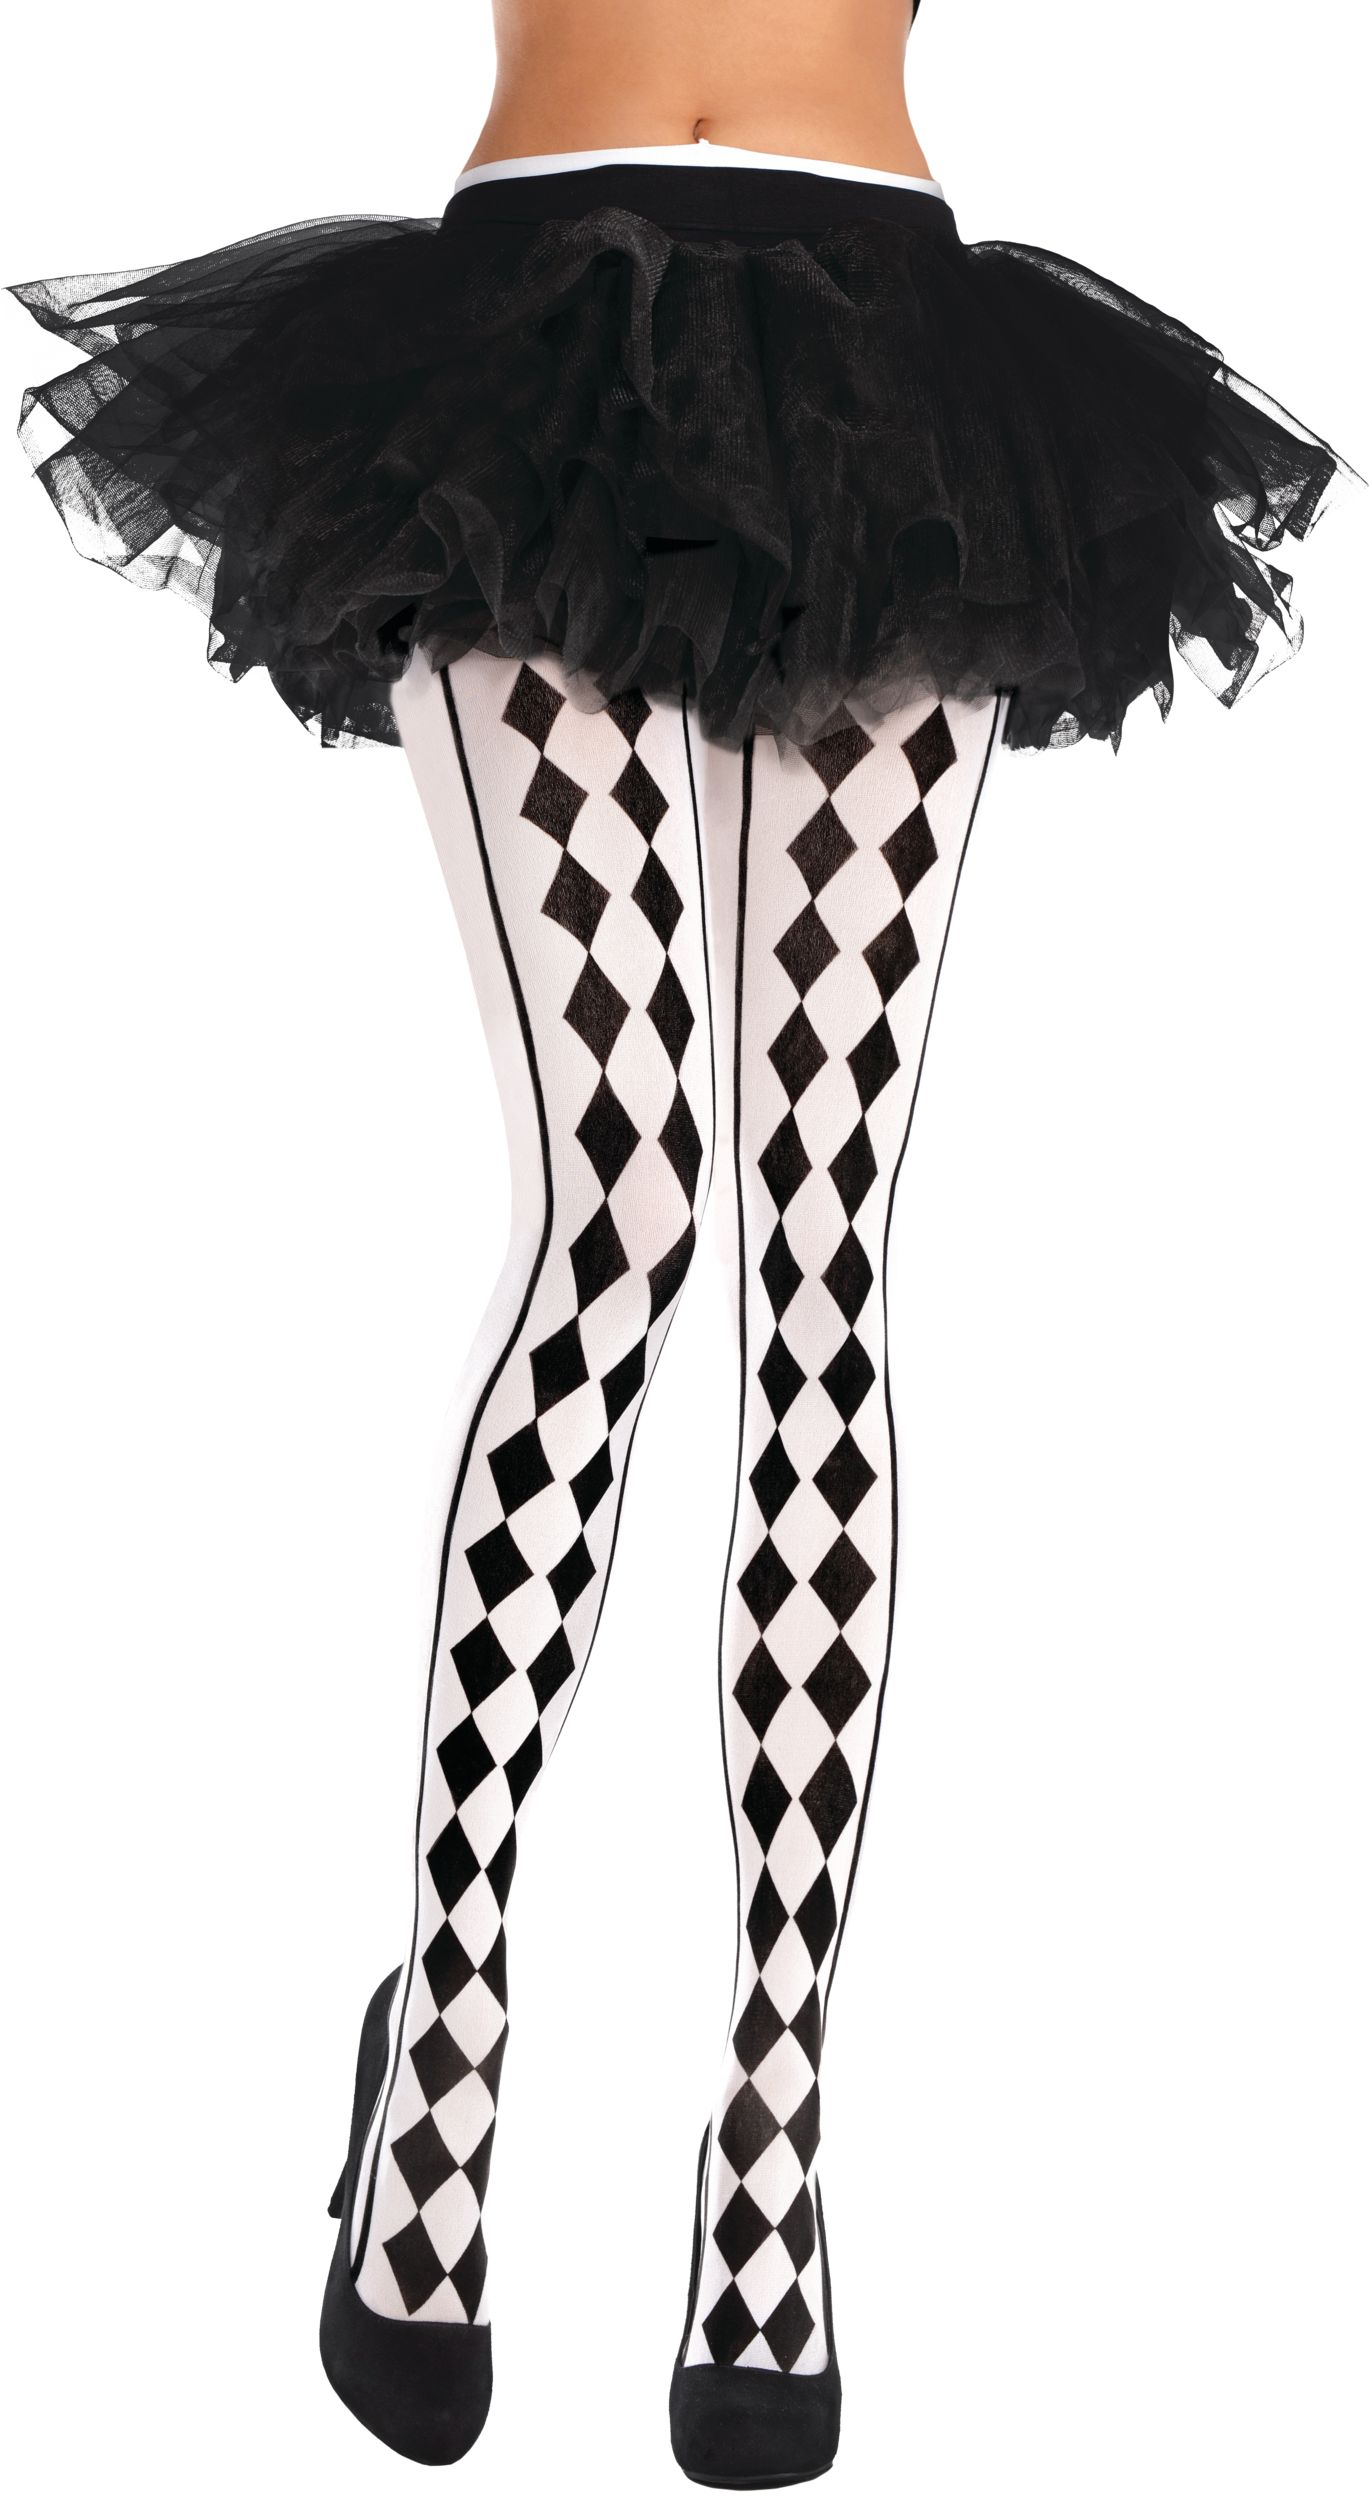 https://media-www.partycity.ca/product/seasonal-gardening/party-city-seasonal/party-city-halloween-and-fall-decor/8519802/black-and-white-harlequin-tights-1c62053a-8beb-4e52-8017-e0eaed159f54-jpgrendition.jpg